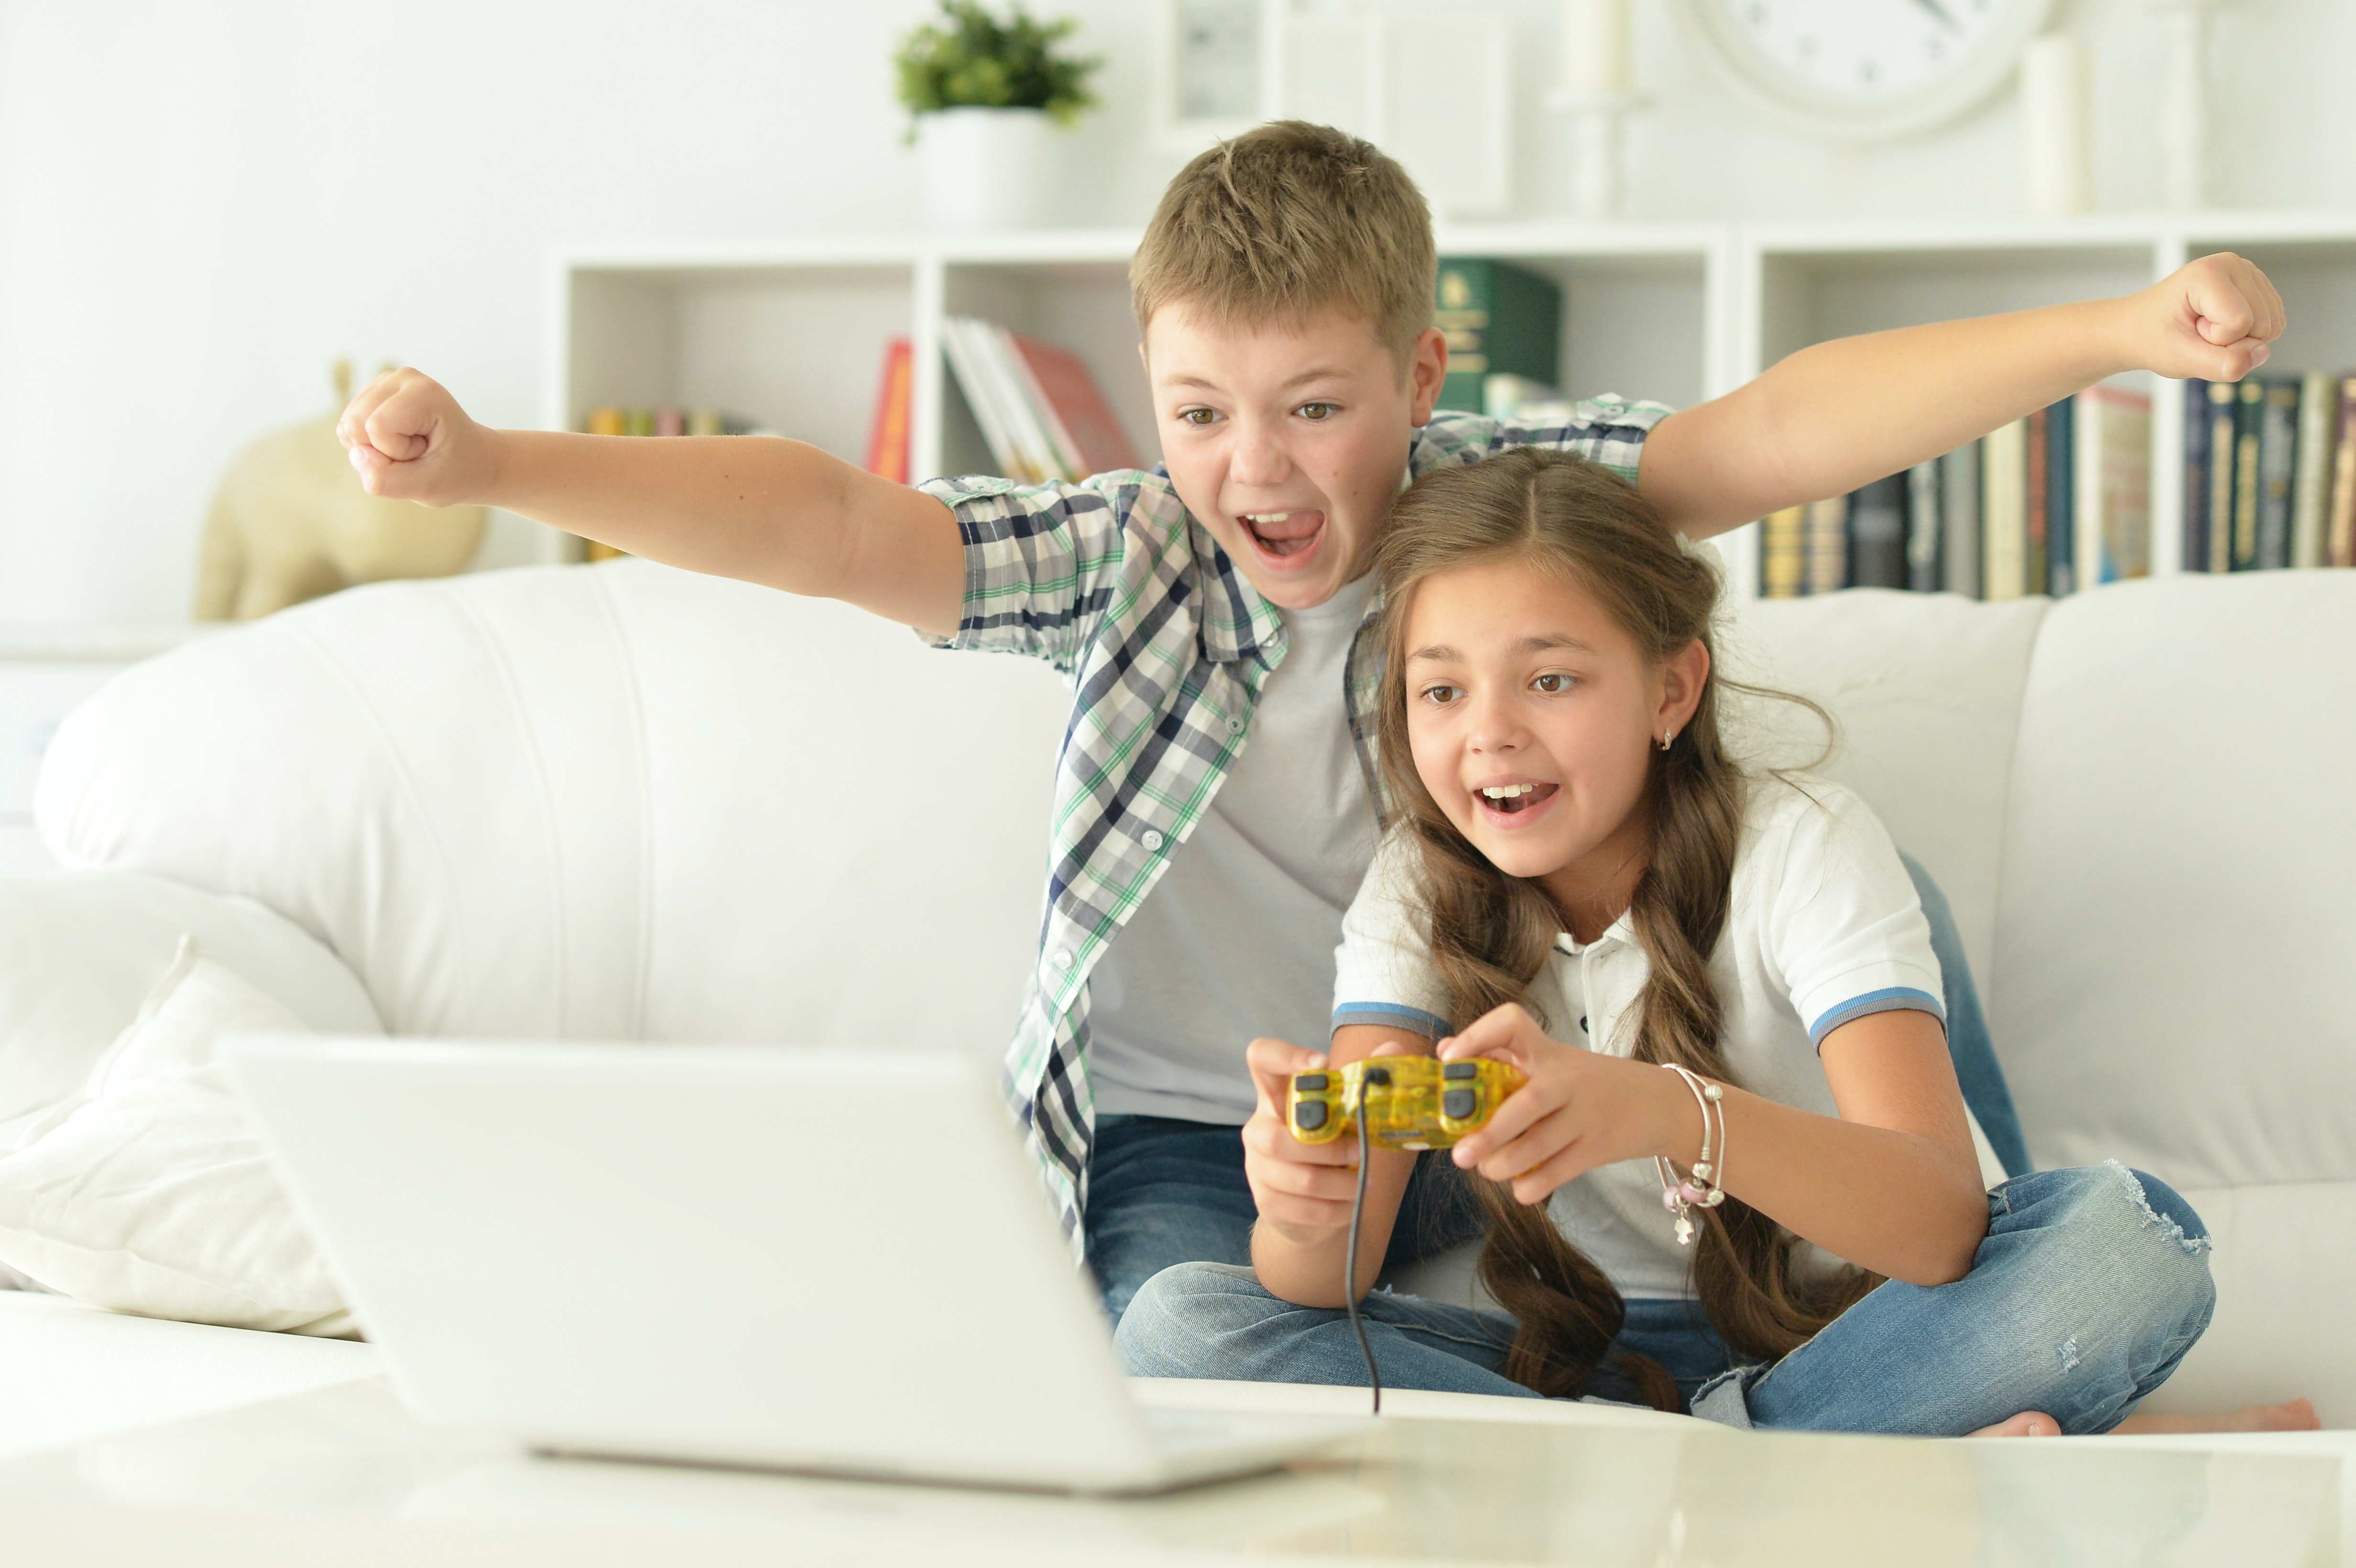 Boy and girl playing with a video game controller.